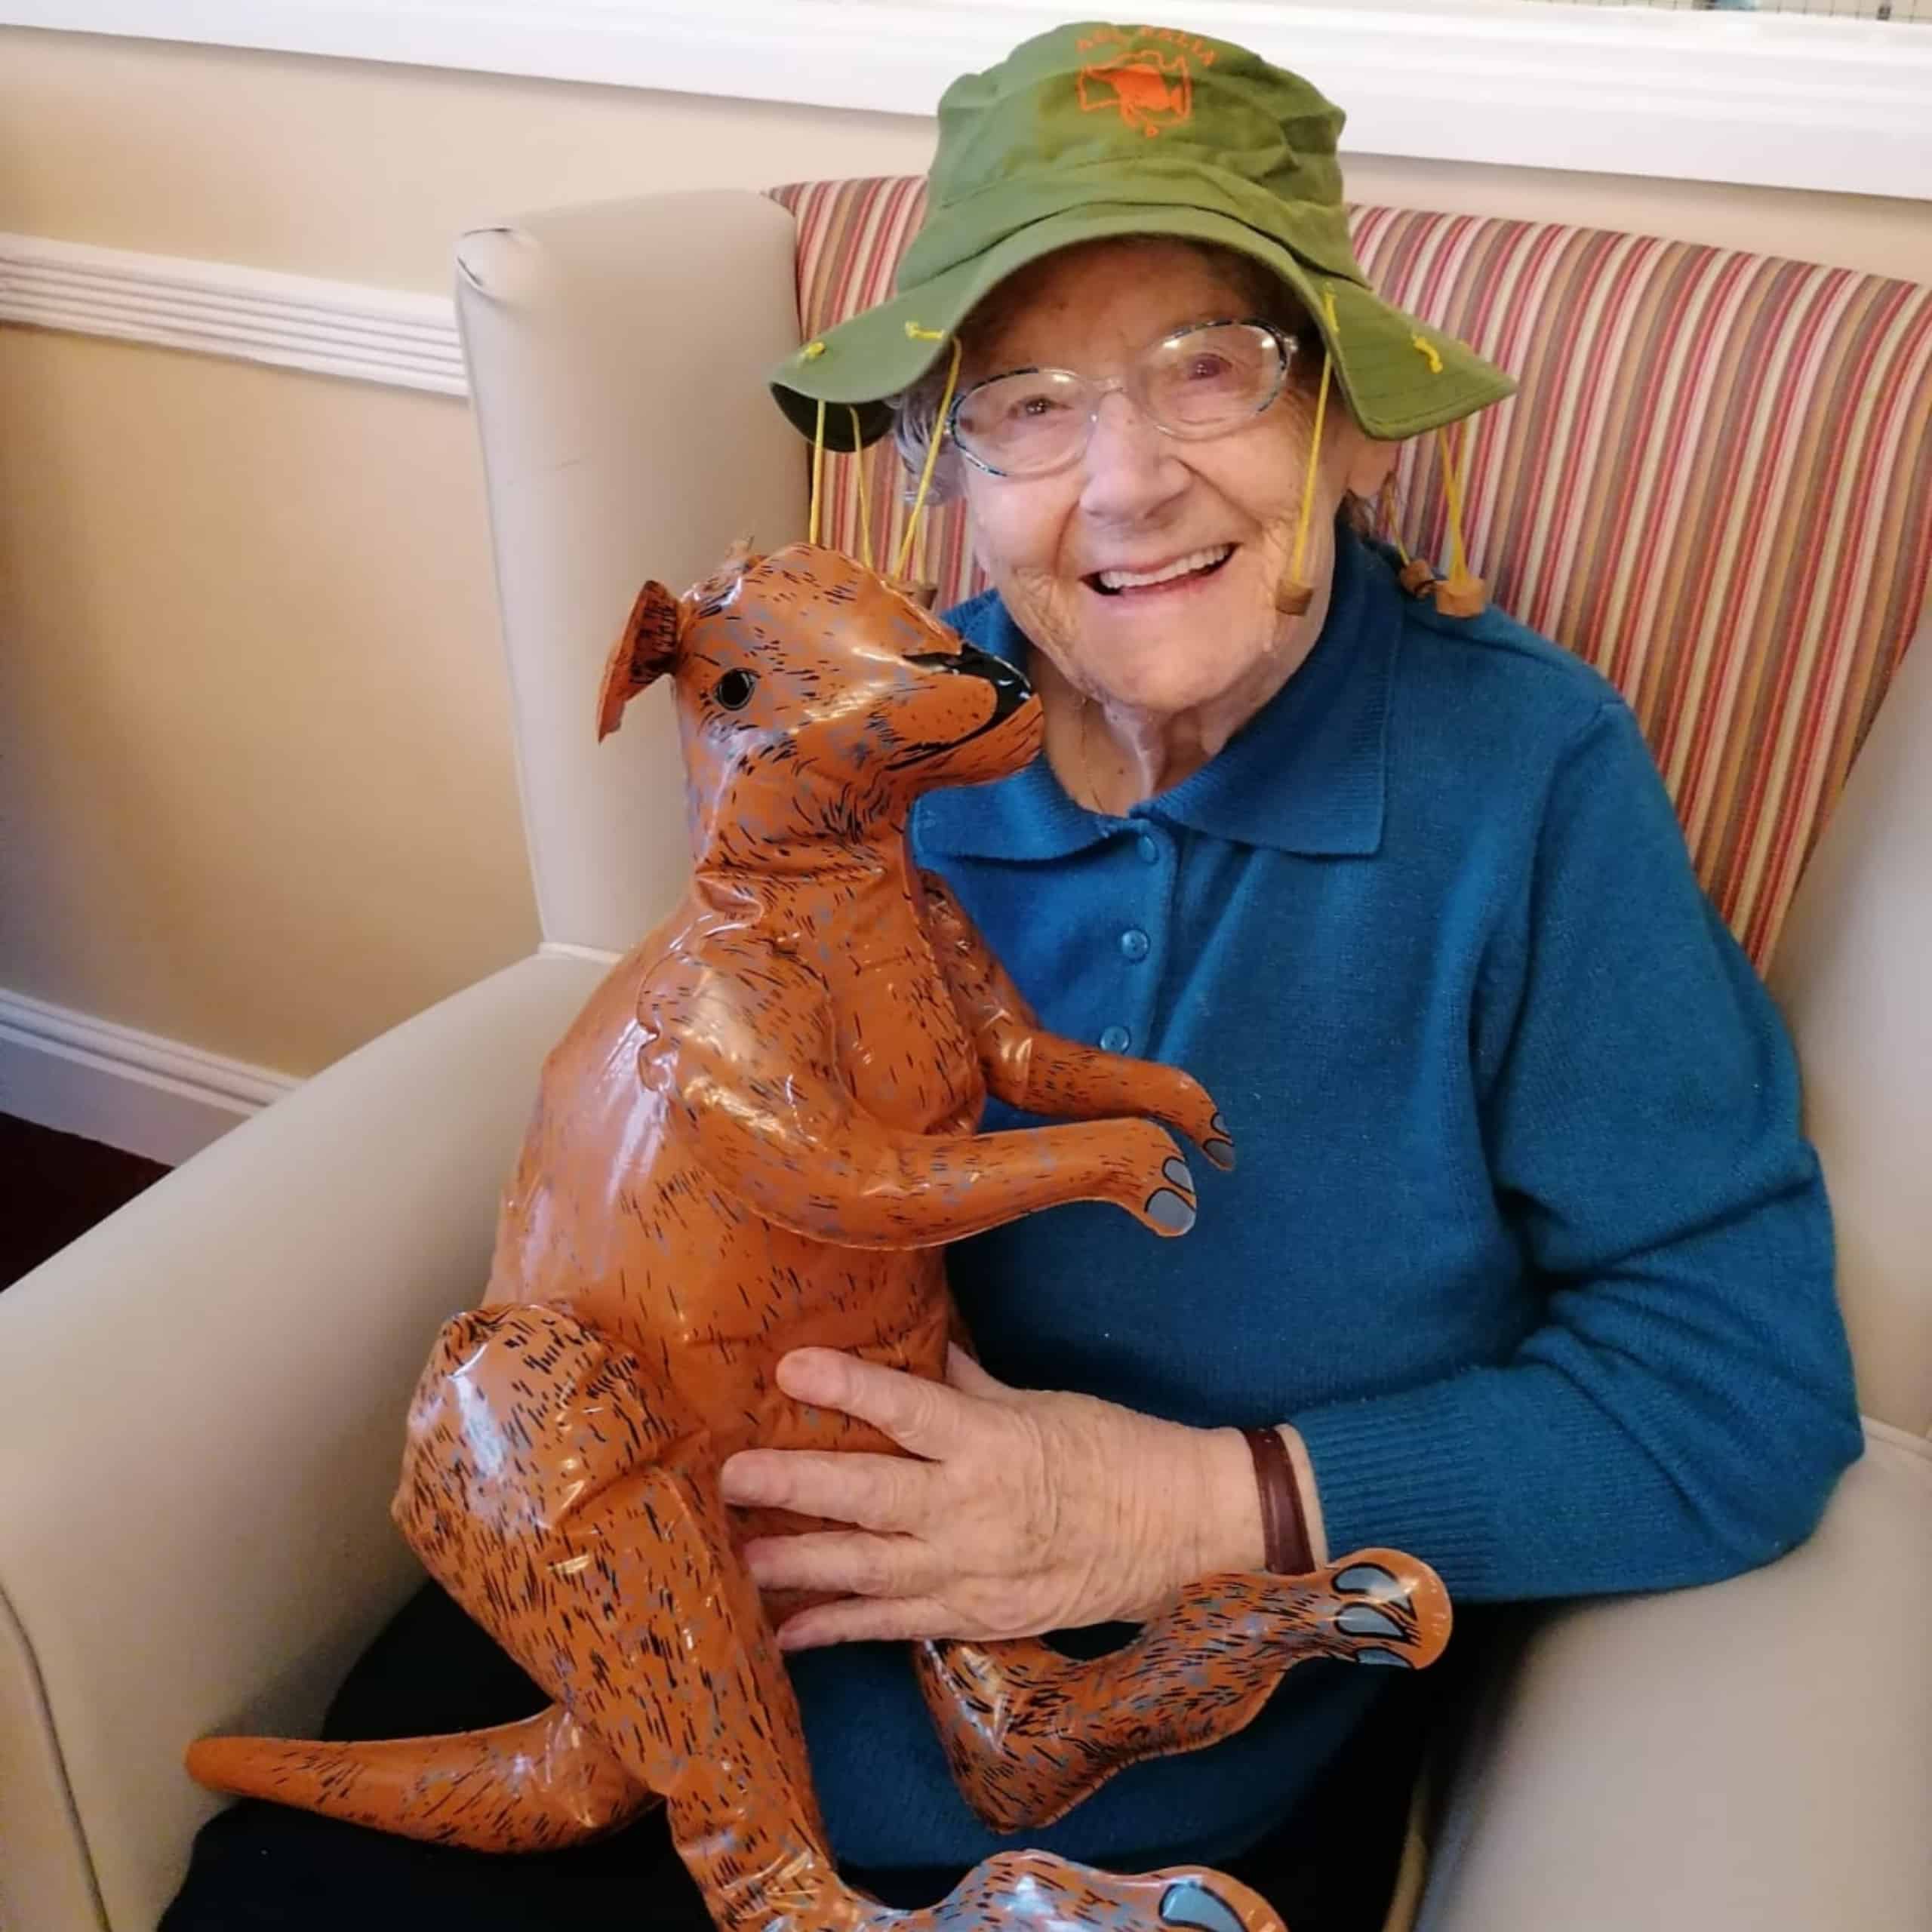 Atherton care home resident Sybil Downham enjoying the Australia Day celebrations at The Chanters with a cork hat and inflatable kangaroo.